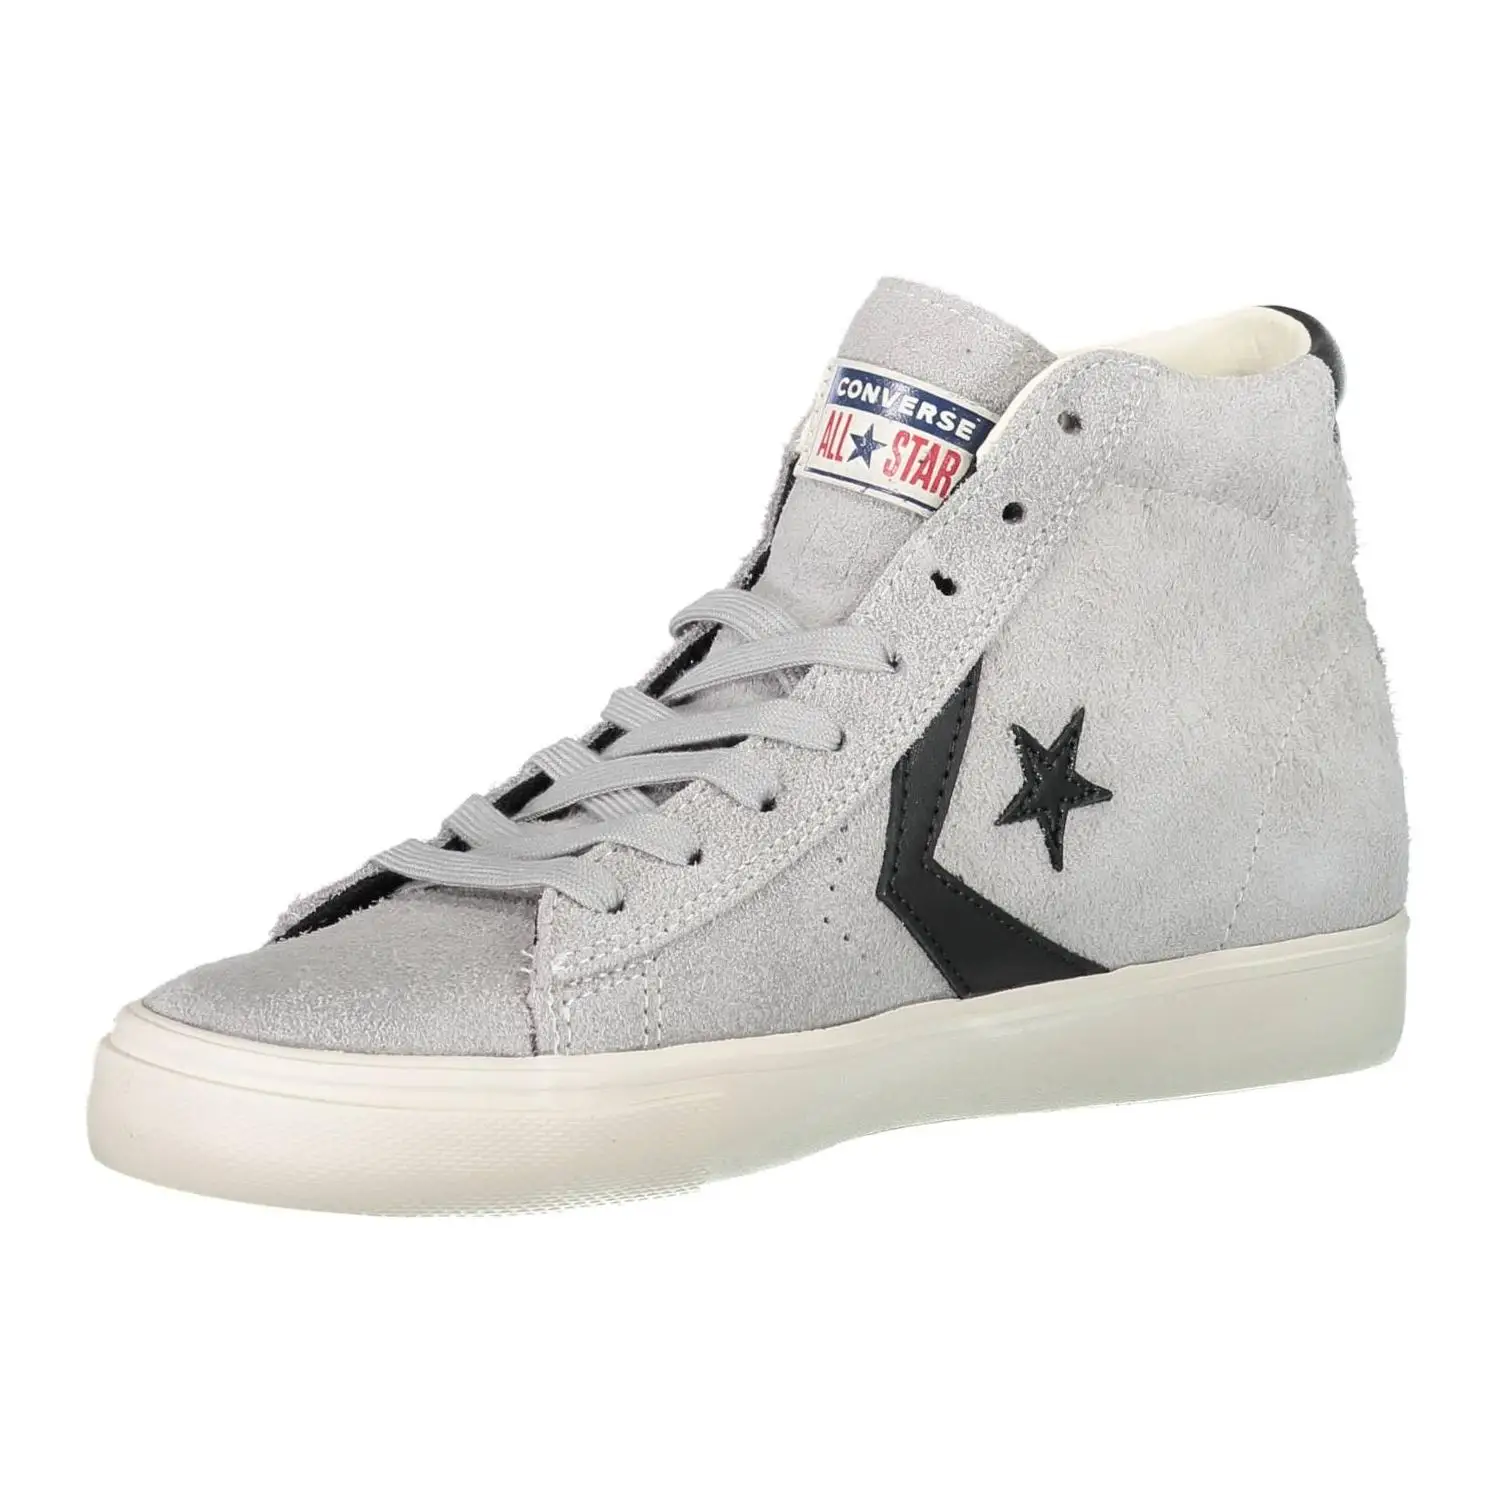 Converse Limited Edition Uomo Store, 51% OFF | lagence.tv عطر نونو